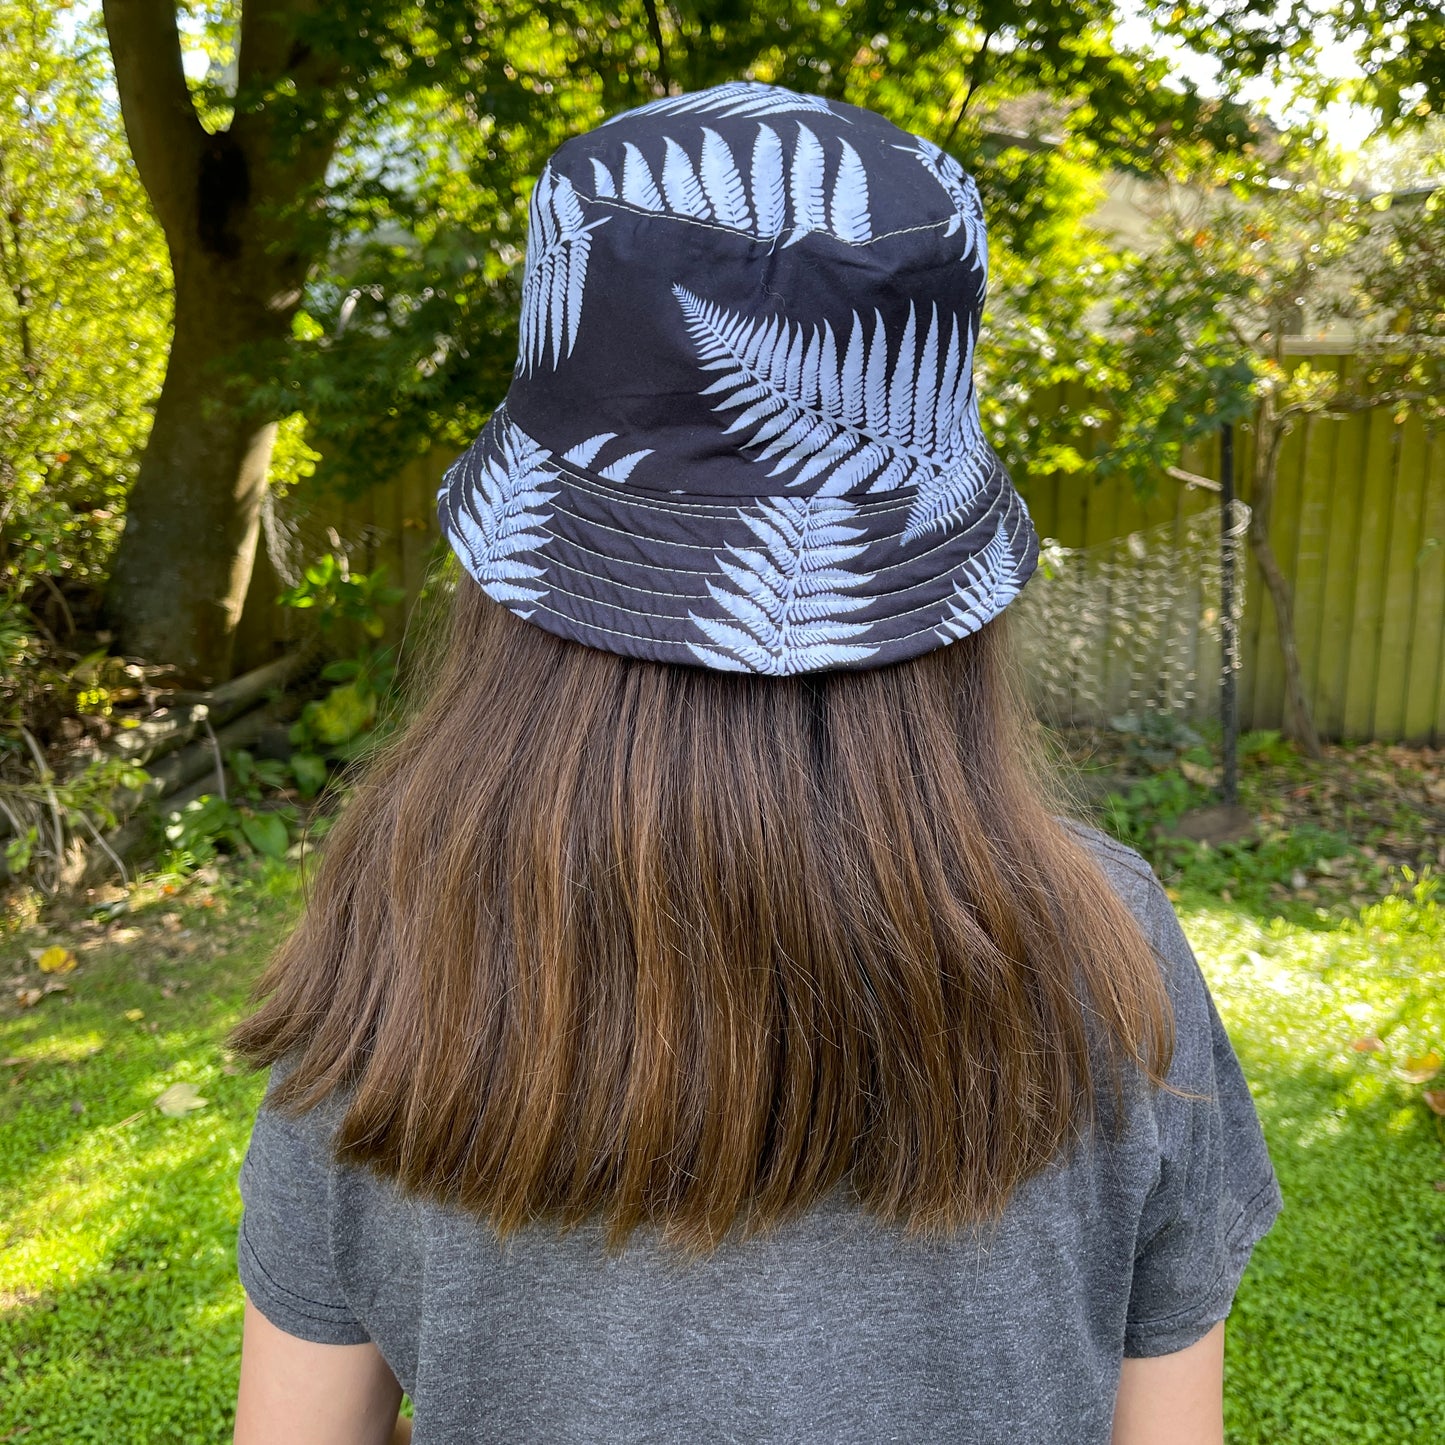 Back of a young girl with long brown hair head wearing a bucket hat in black with white ferns printed on it.